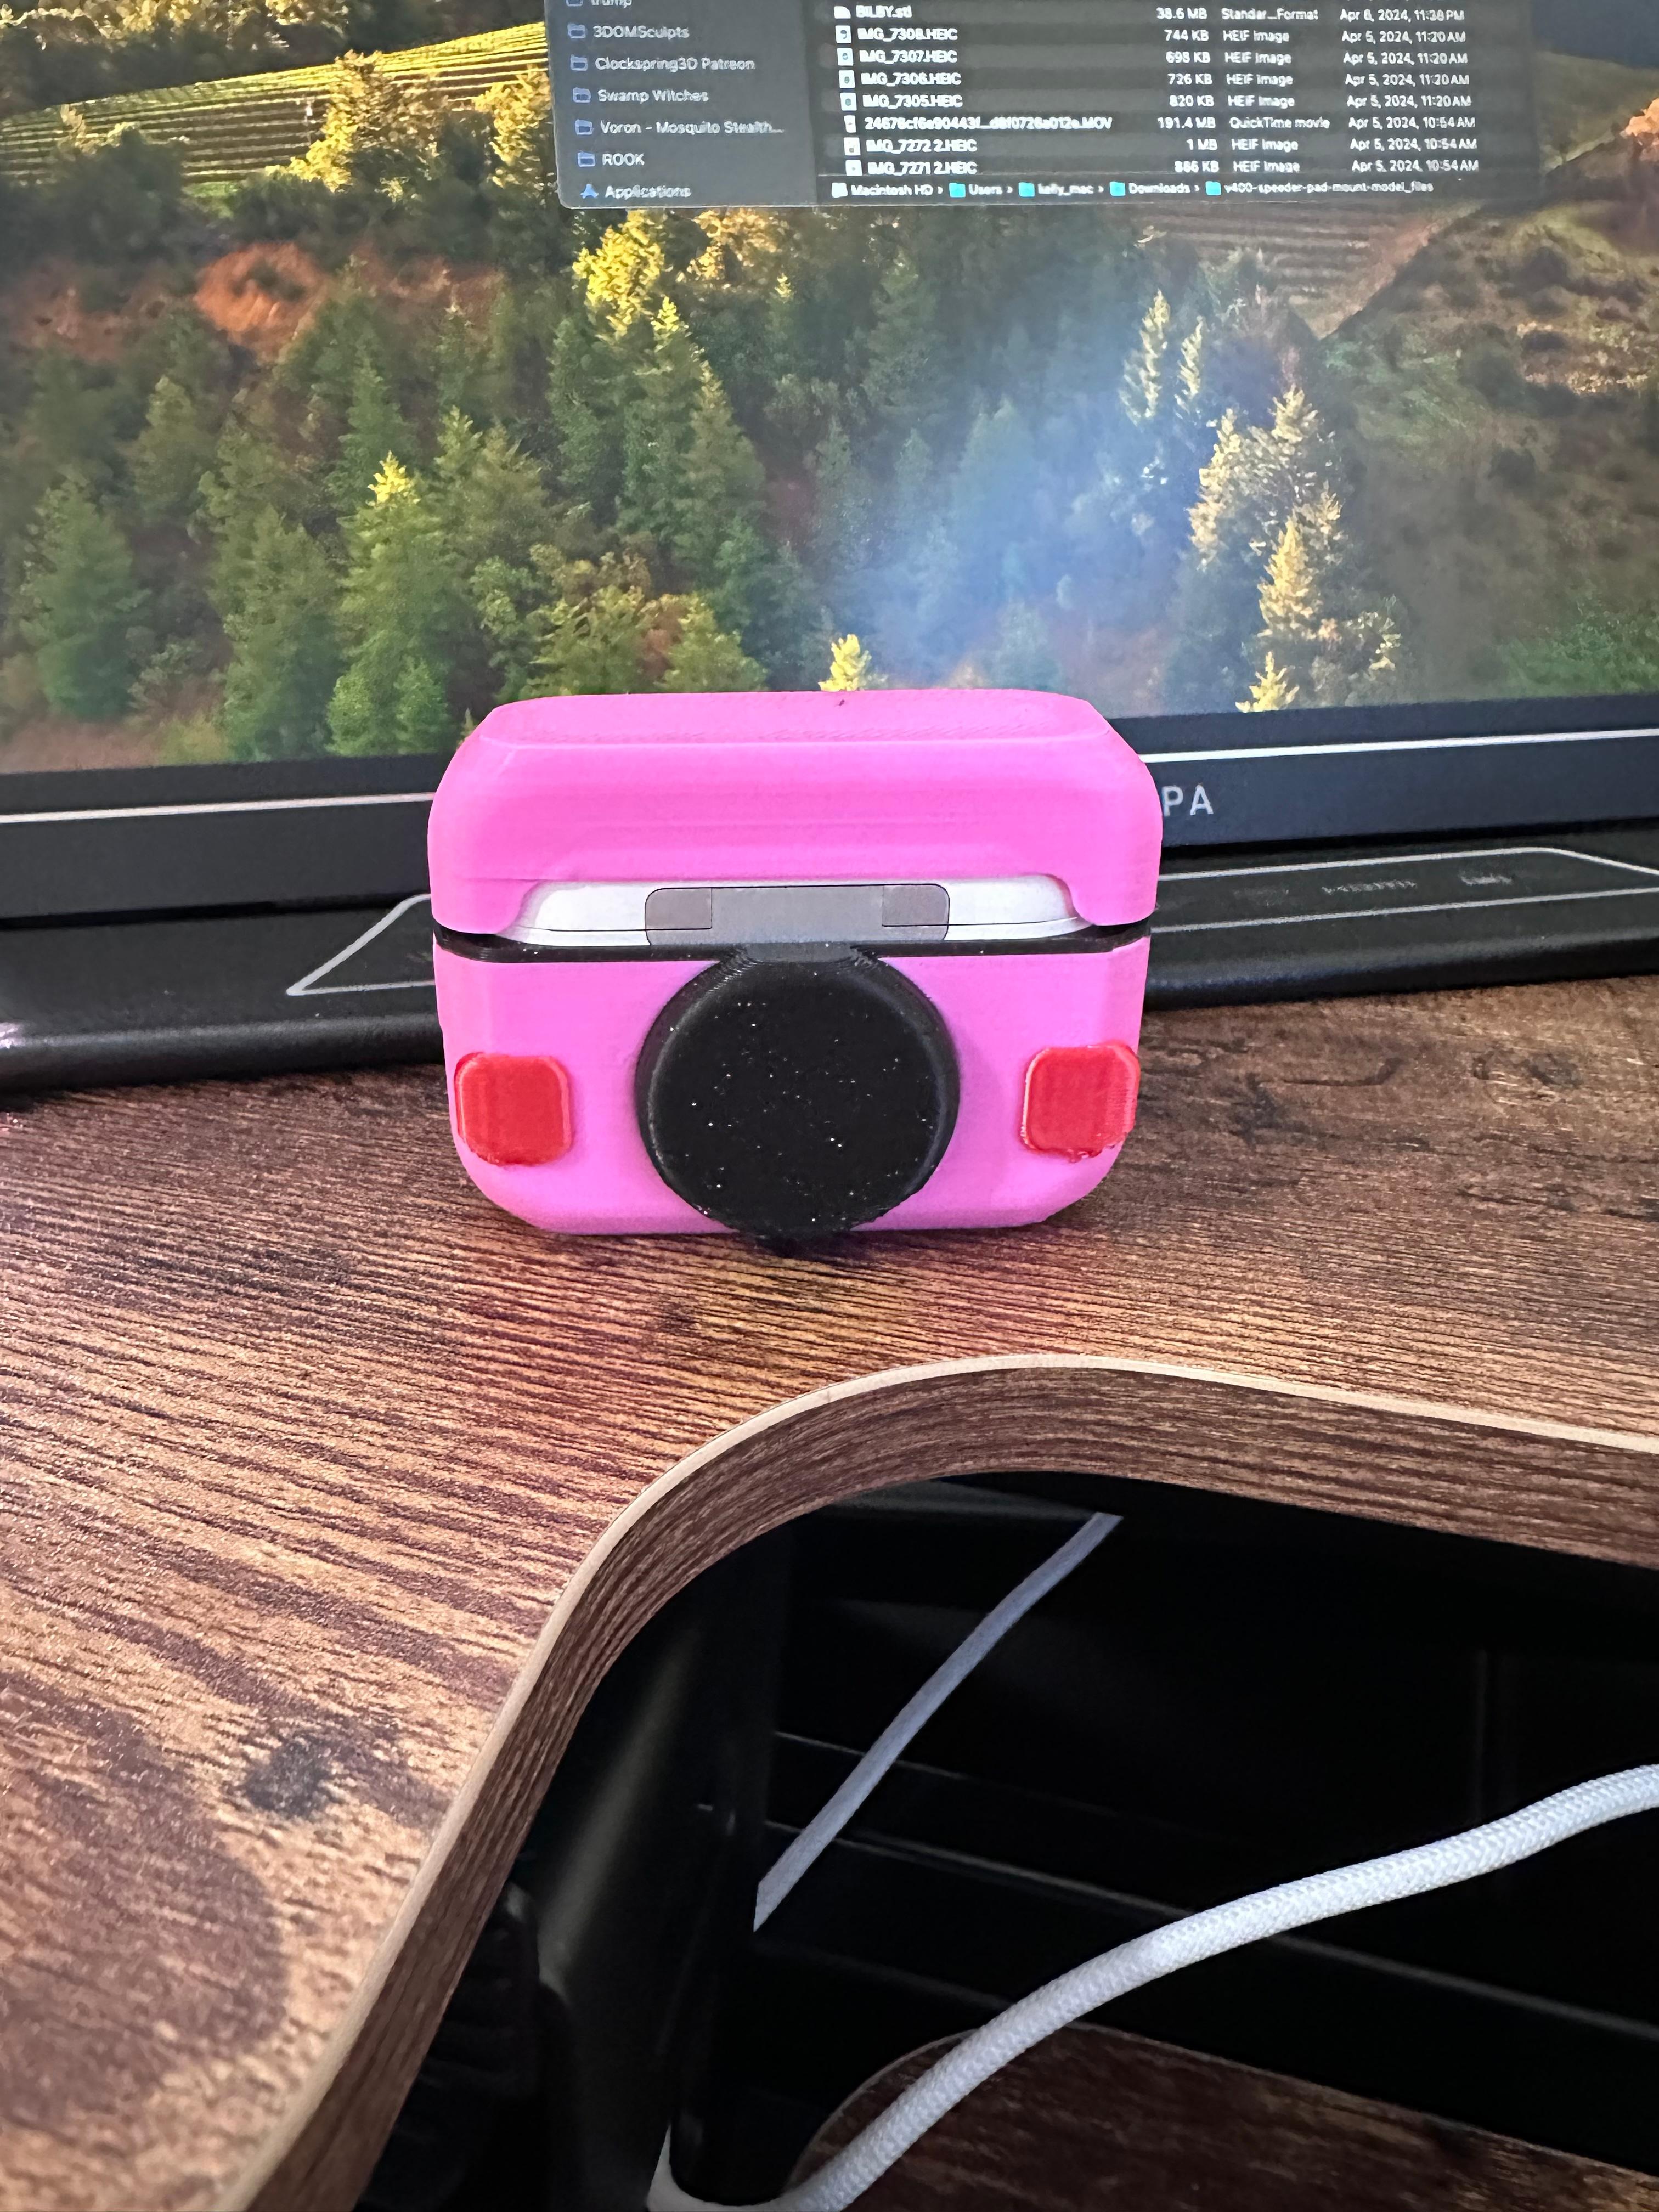 Jeep, WRANGLER, BARBIE JEEP, PINK, APPLE AIRPODS CASE - PROTECTIONS, CASE, COVER, APPLE, AIRPOD 3d model